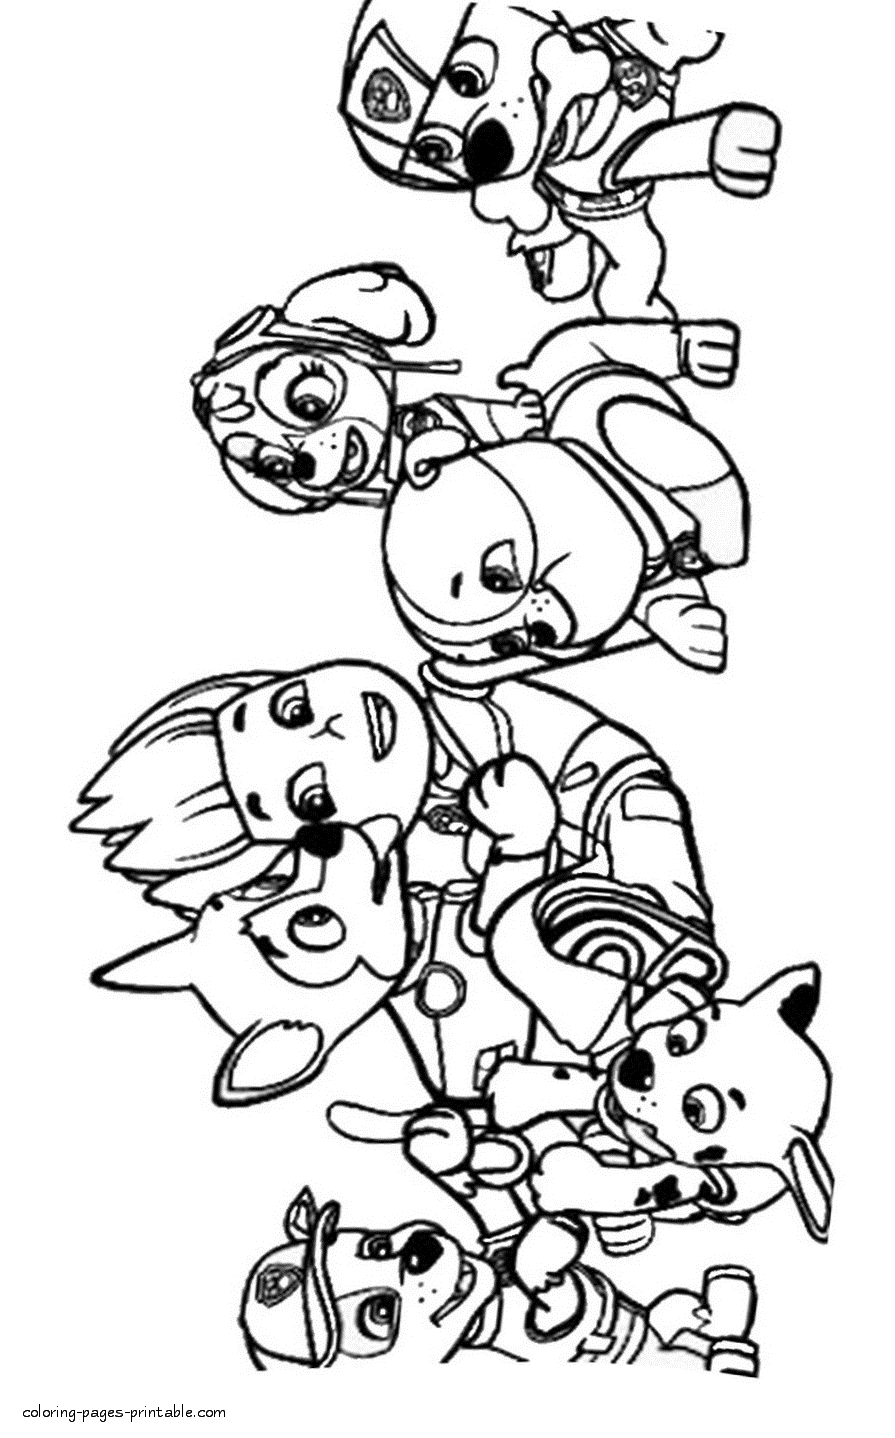 Free Paw Patrol coloring pages printable